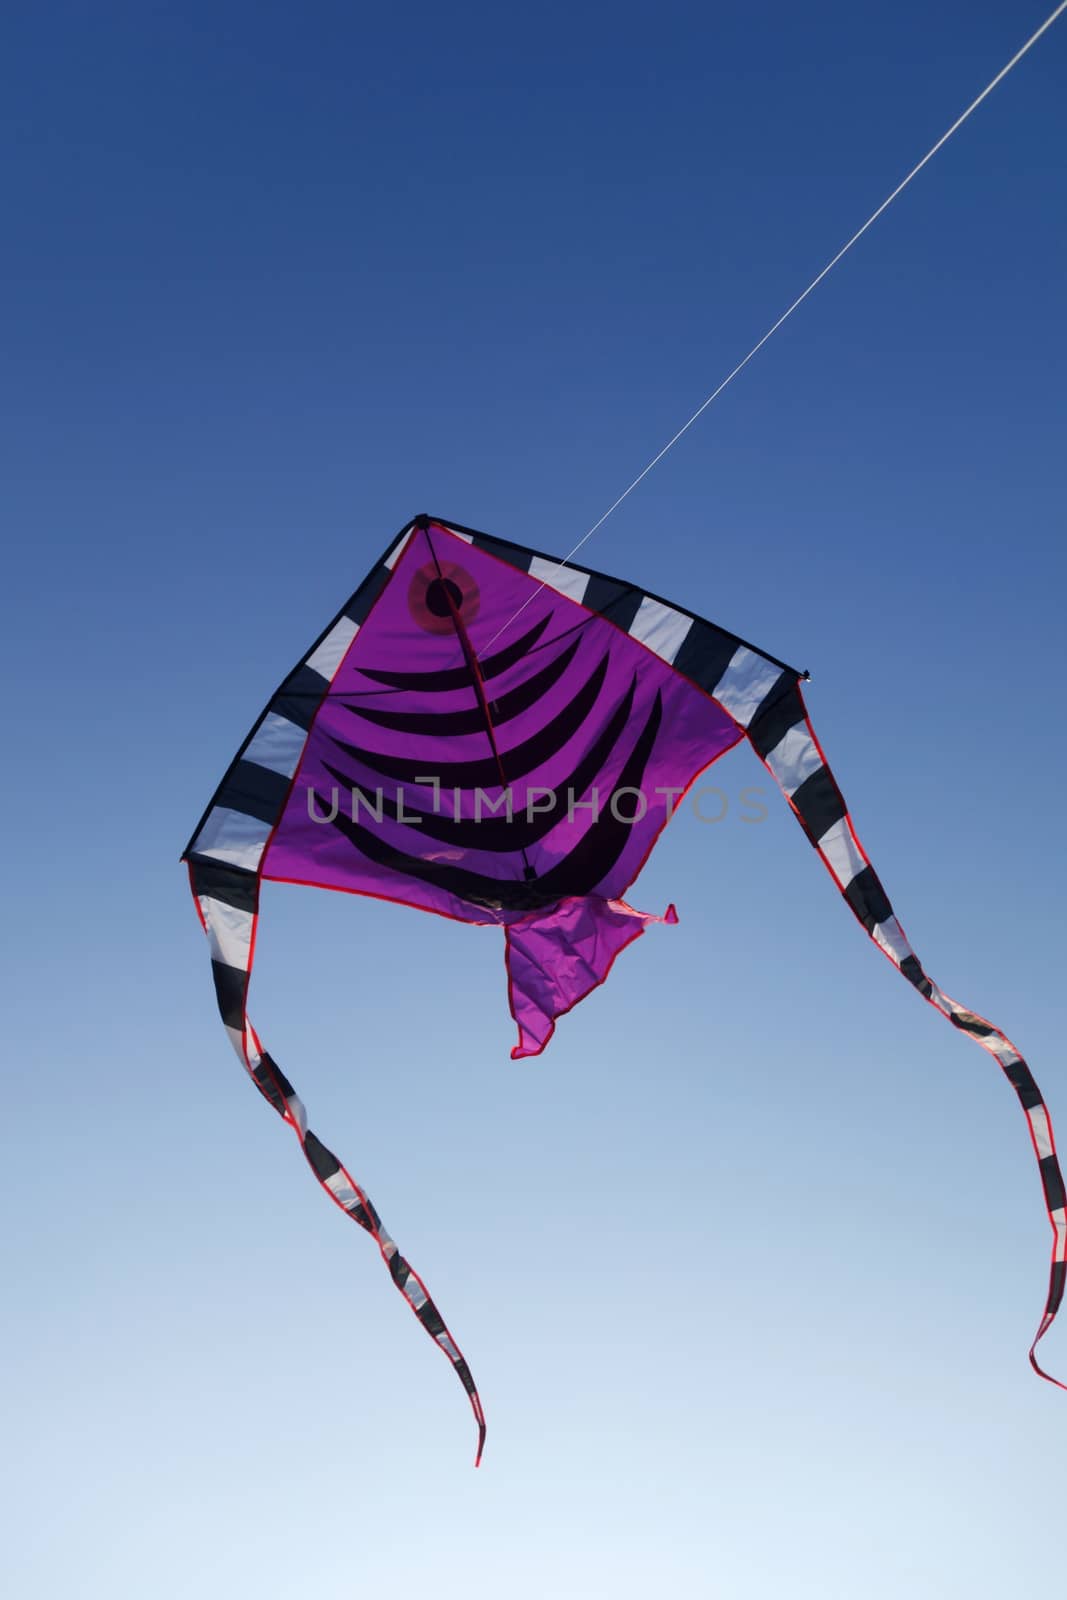 A kite fly in the blue sky